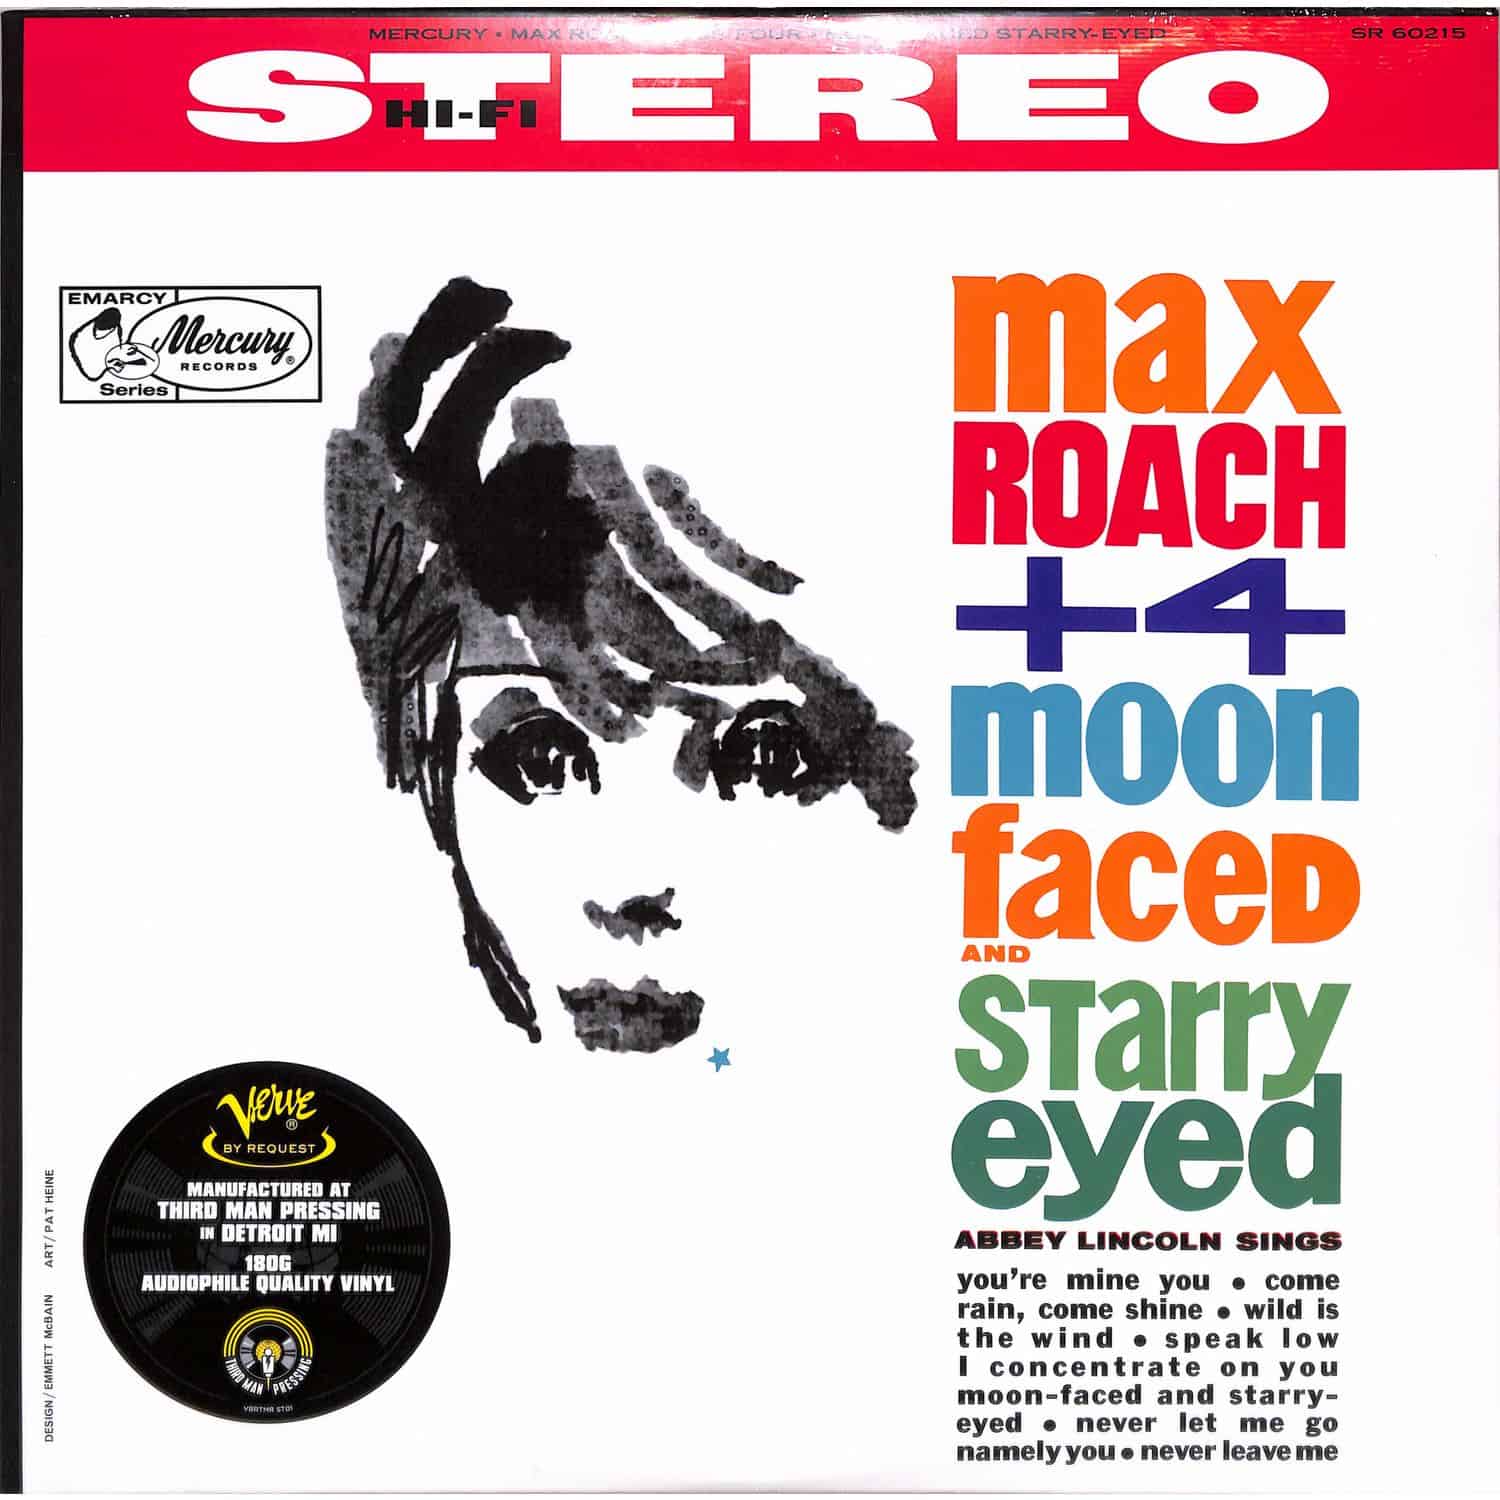 Max +4 Roach - MOON-FACED AND STARRY-EYED 